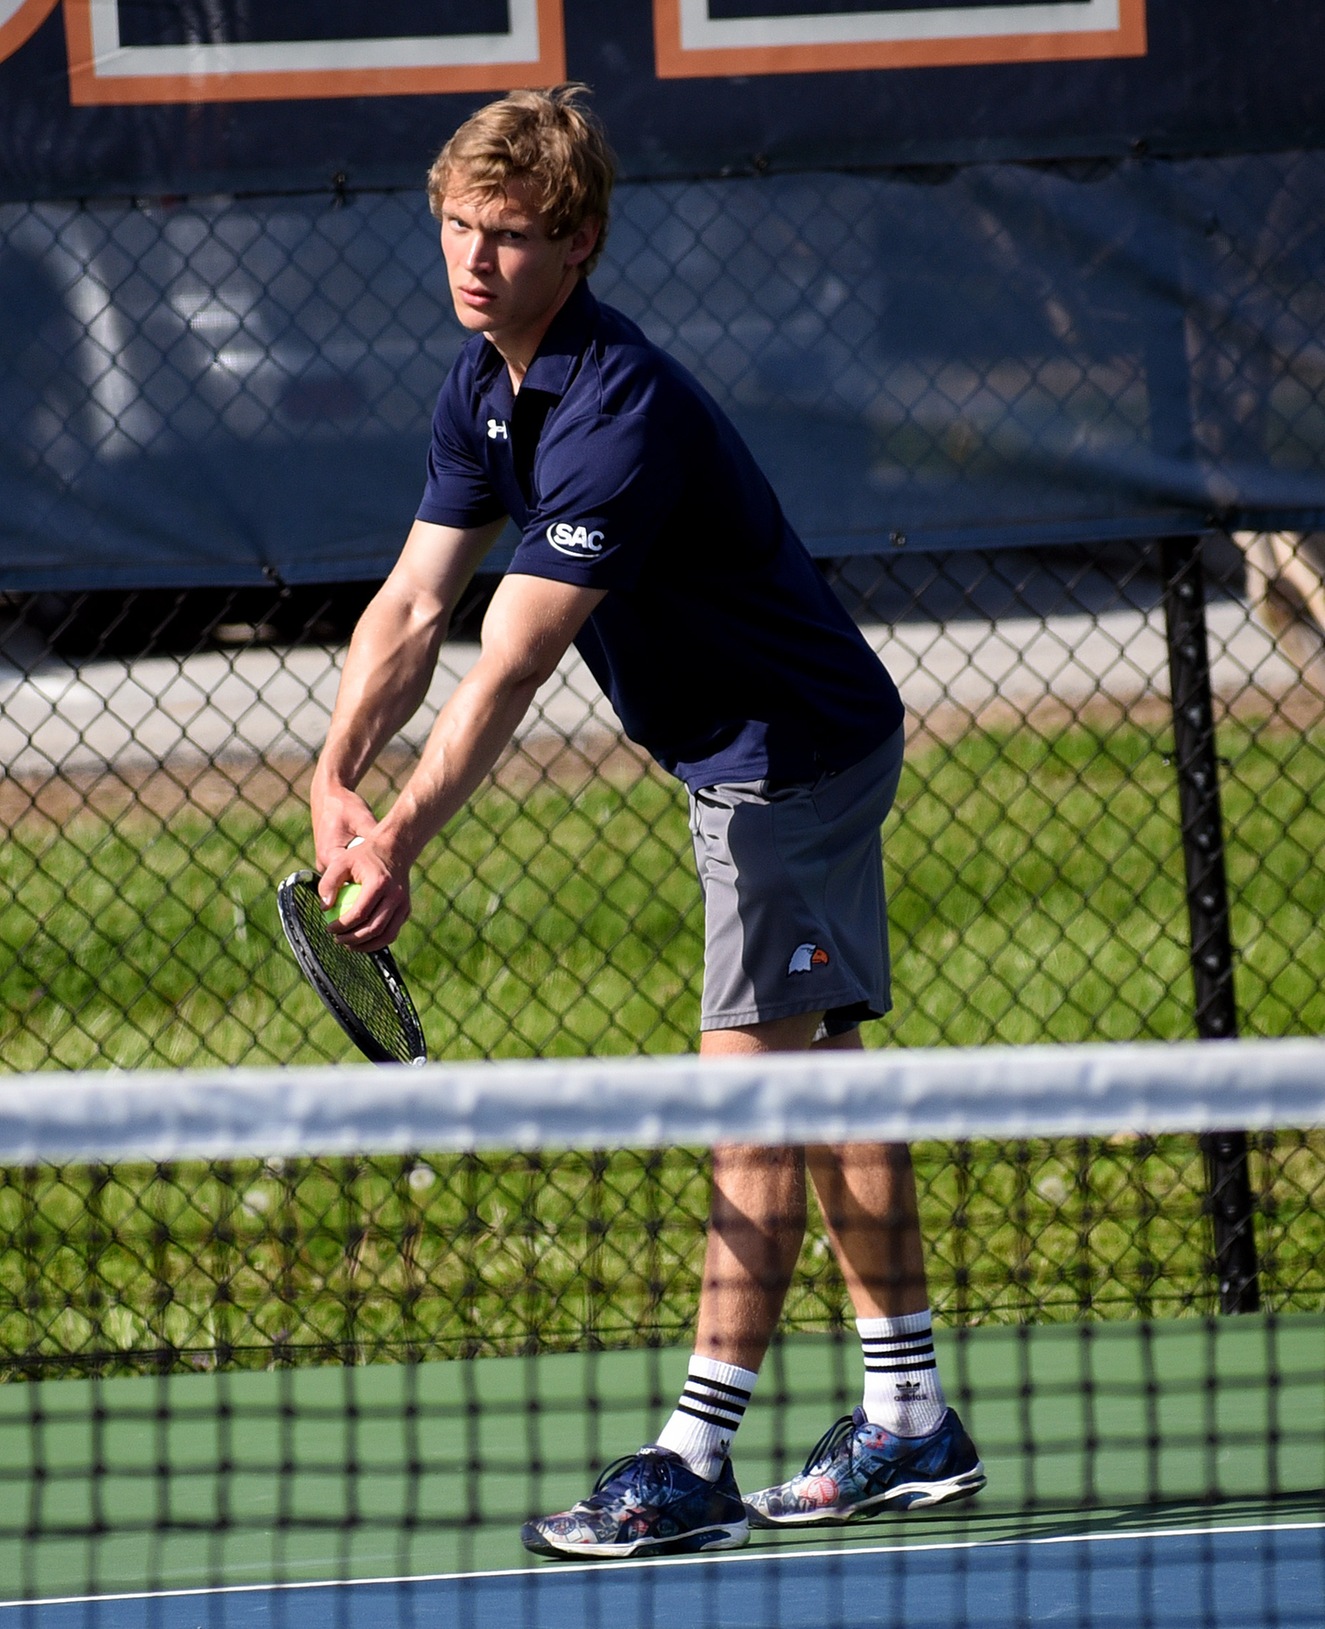 Eagles Compete in Tough Match Against Christian Brothers University